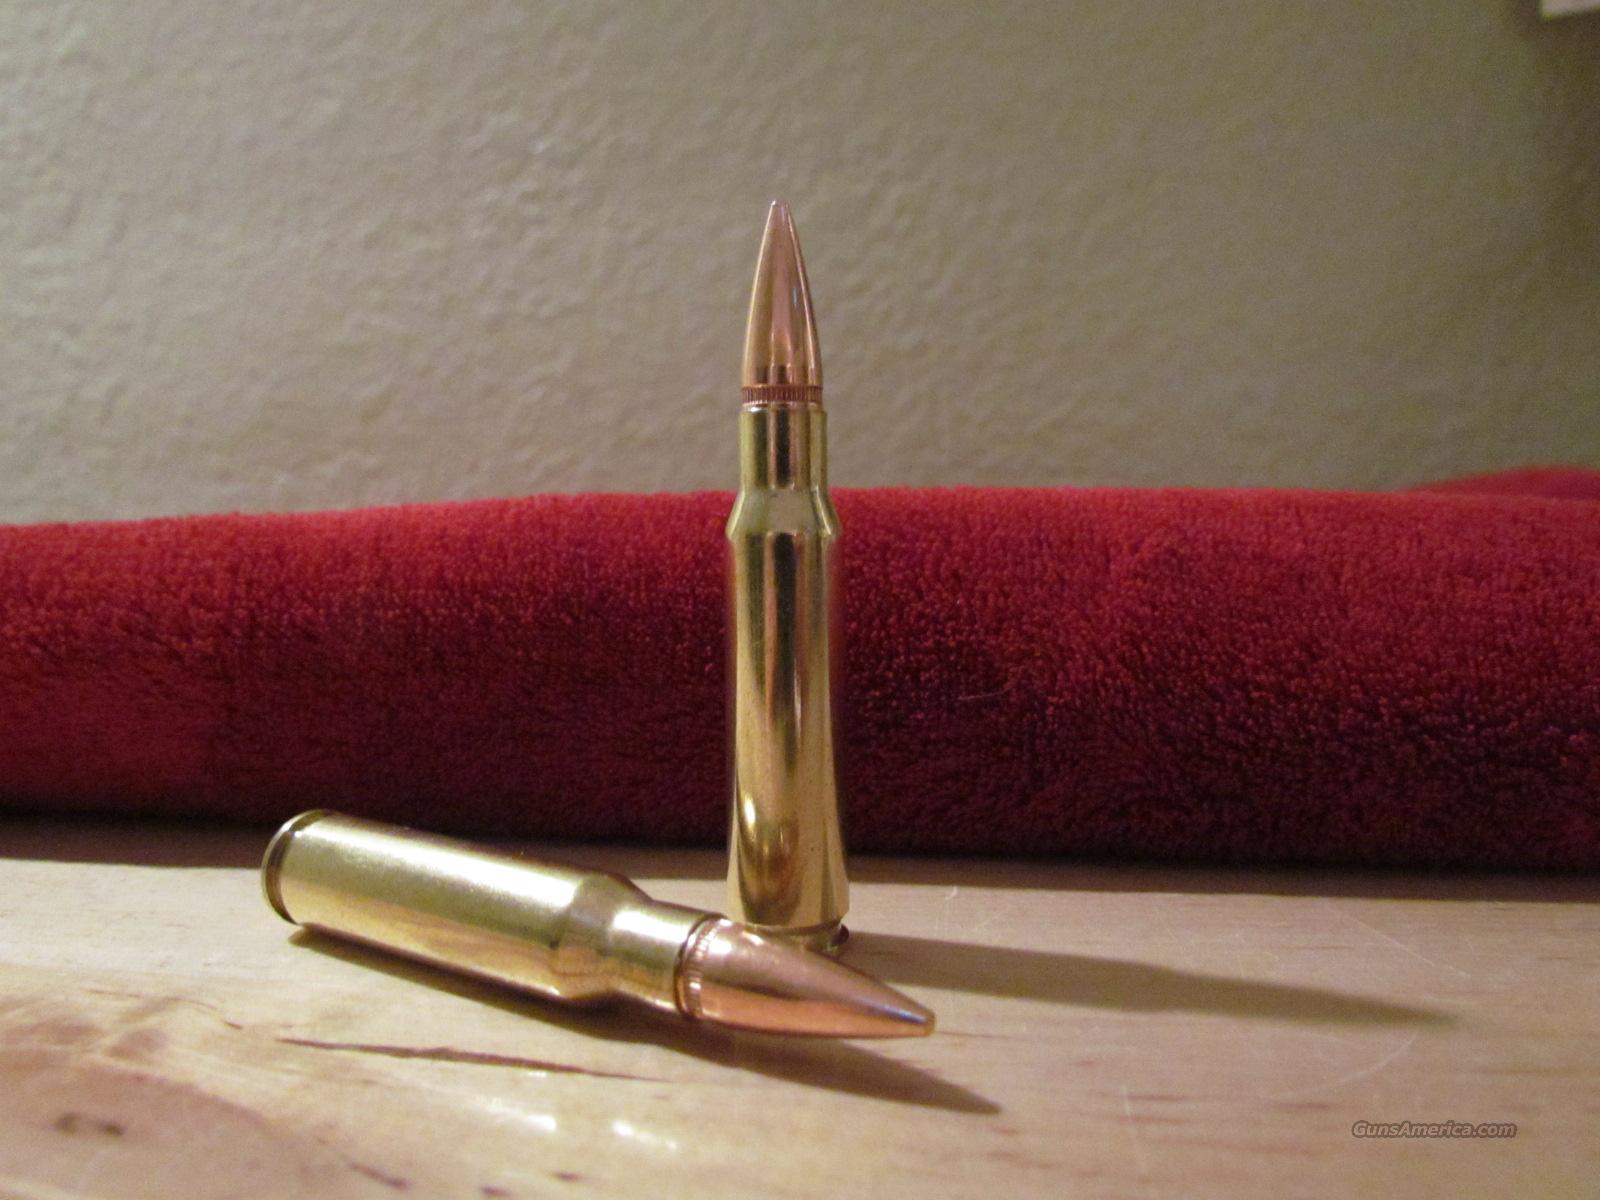 remington 308 subsonic rounds